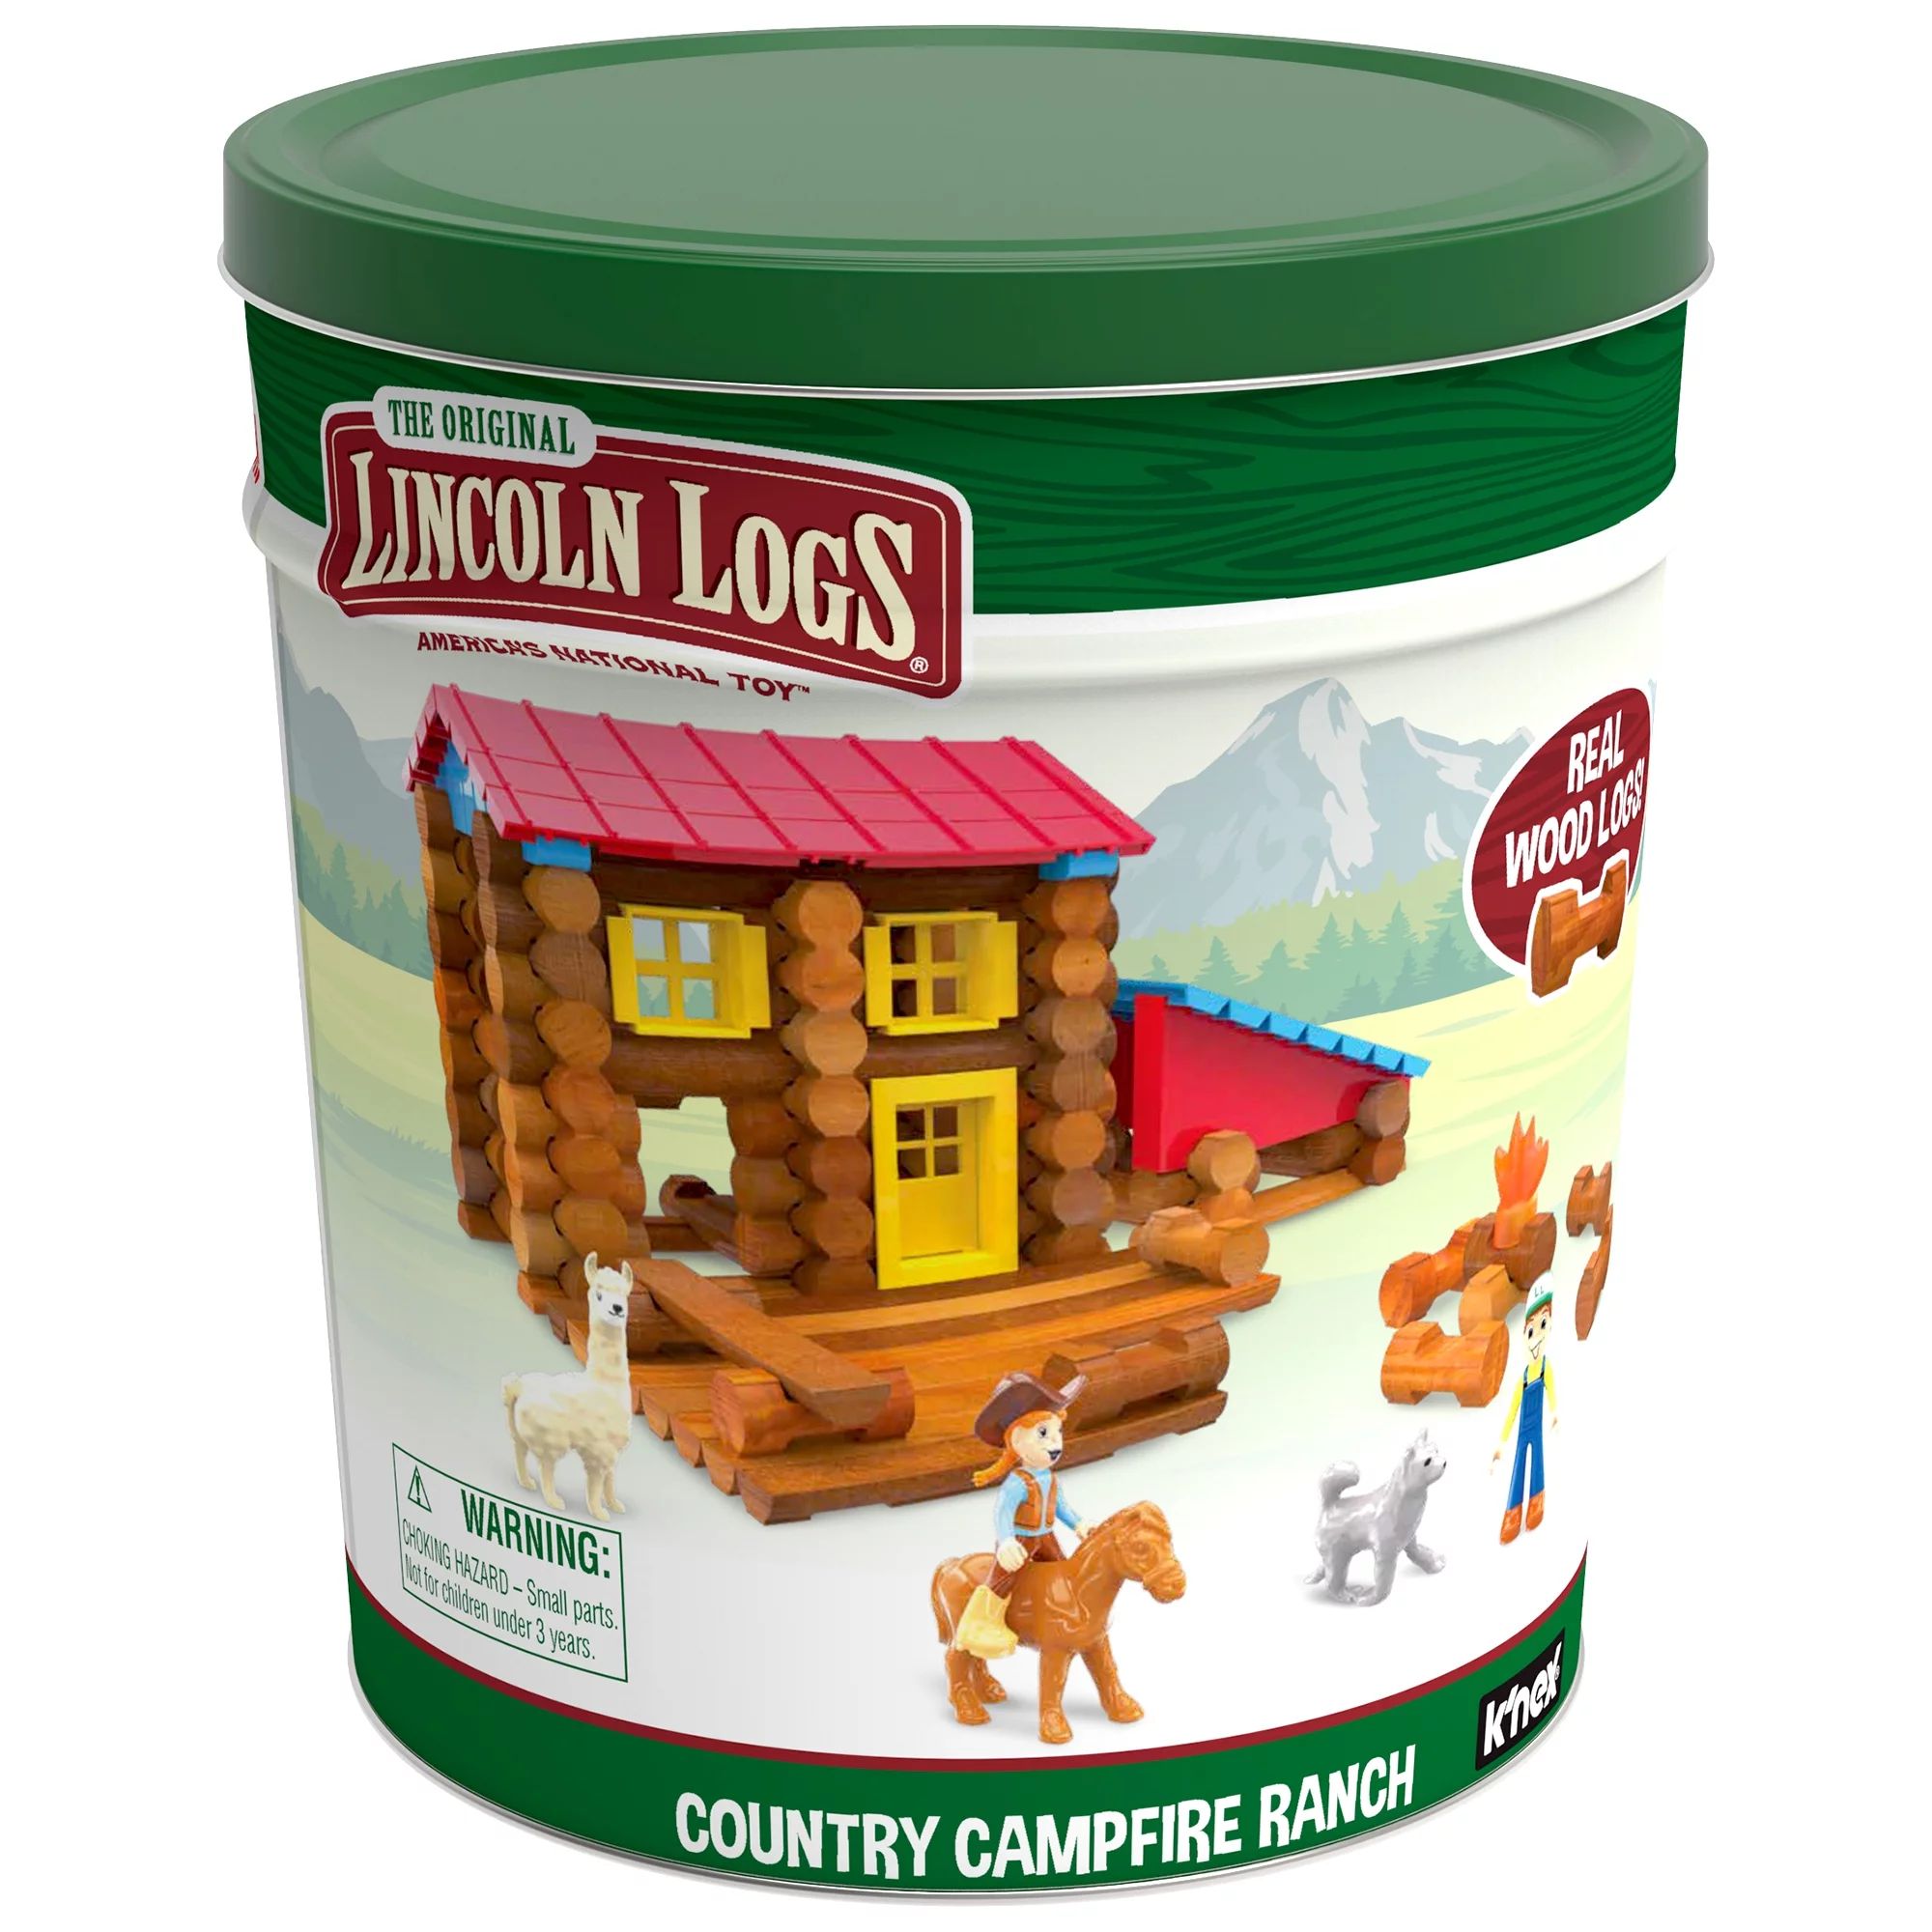 LINCOLN LOGS Country Campfire Ranch - Real Wood Logs - 124 Pieces - Collectible Tin - Exclusive | Walmart (US)